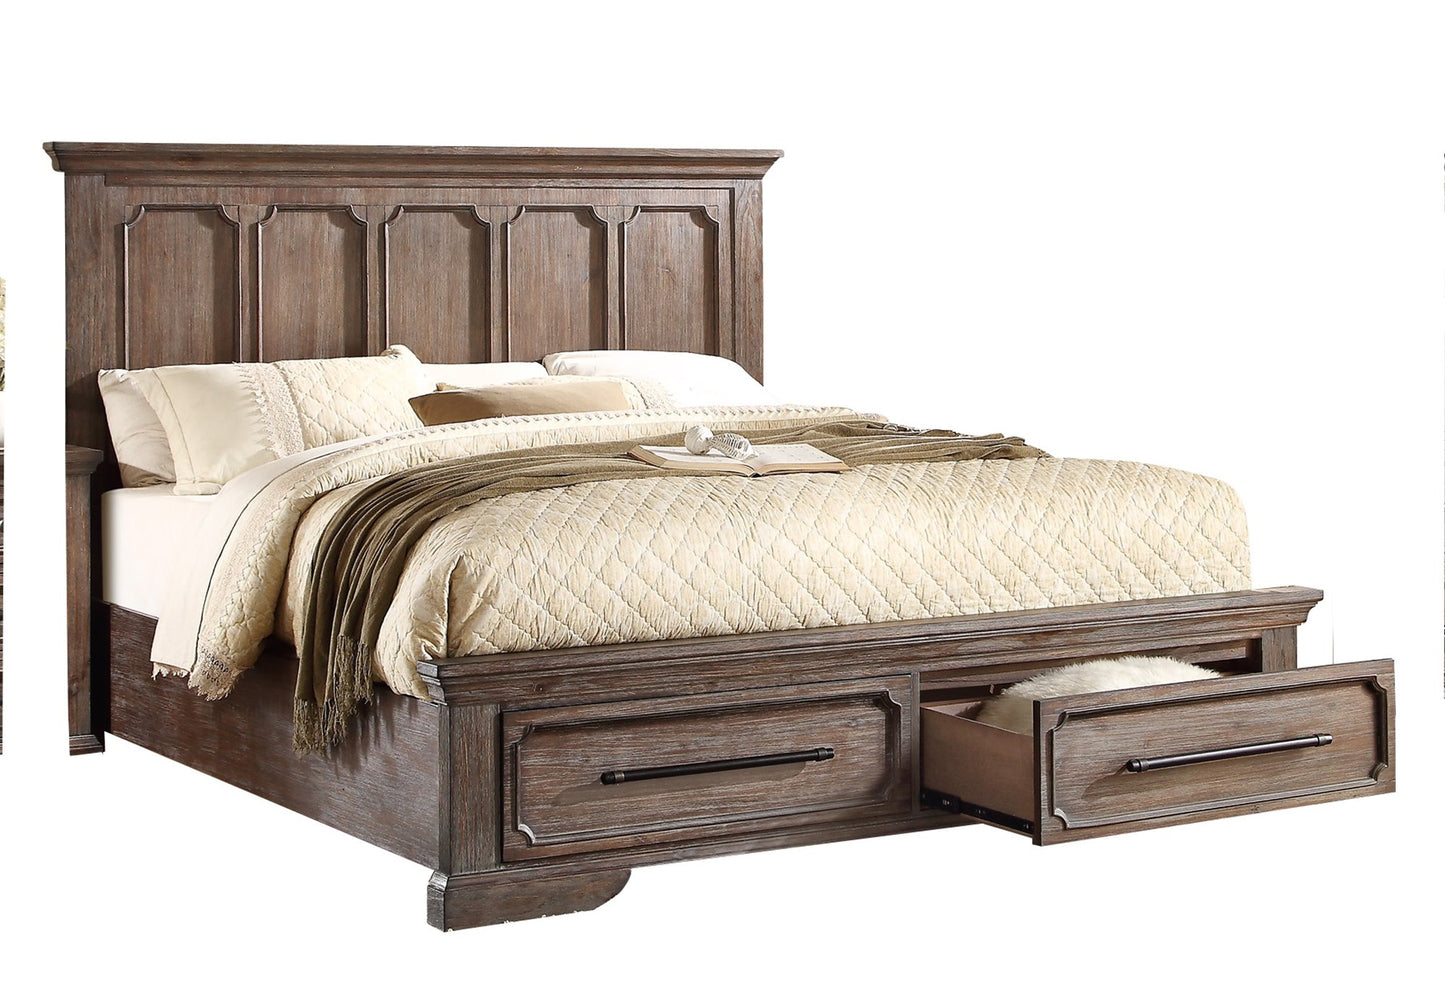 Homelegance Toulon 5PC Bedroom Set E King Platform Bed with Footboard Storages Dresser Mirror Two Nightstand in Distressed Oak